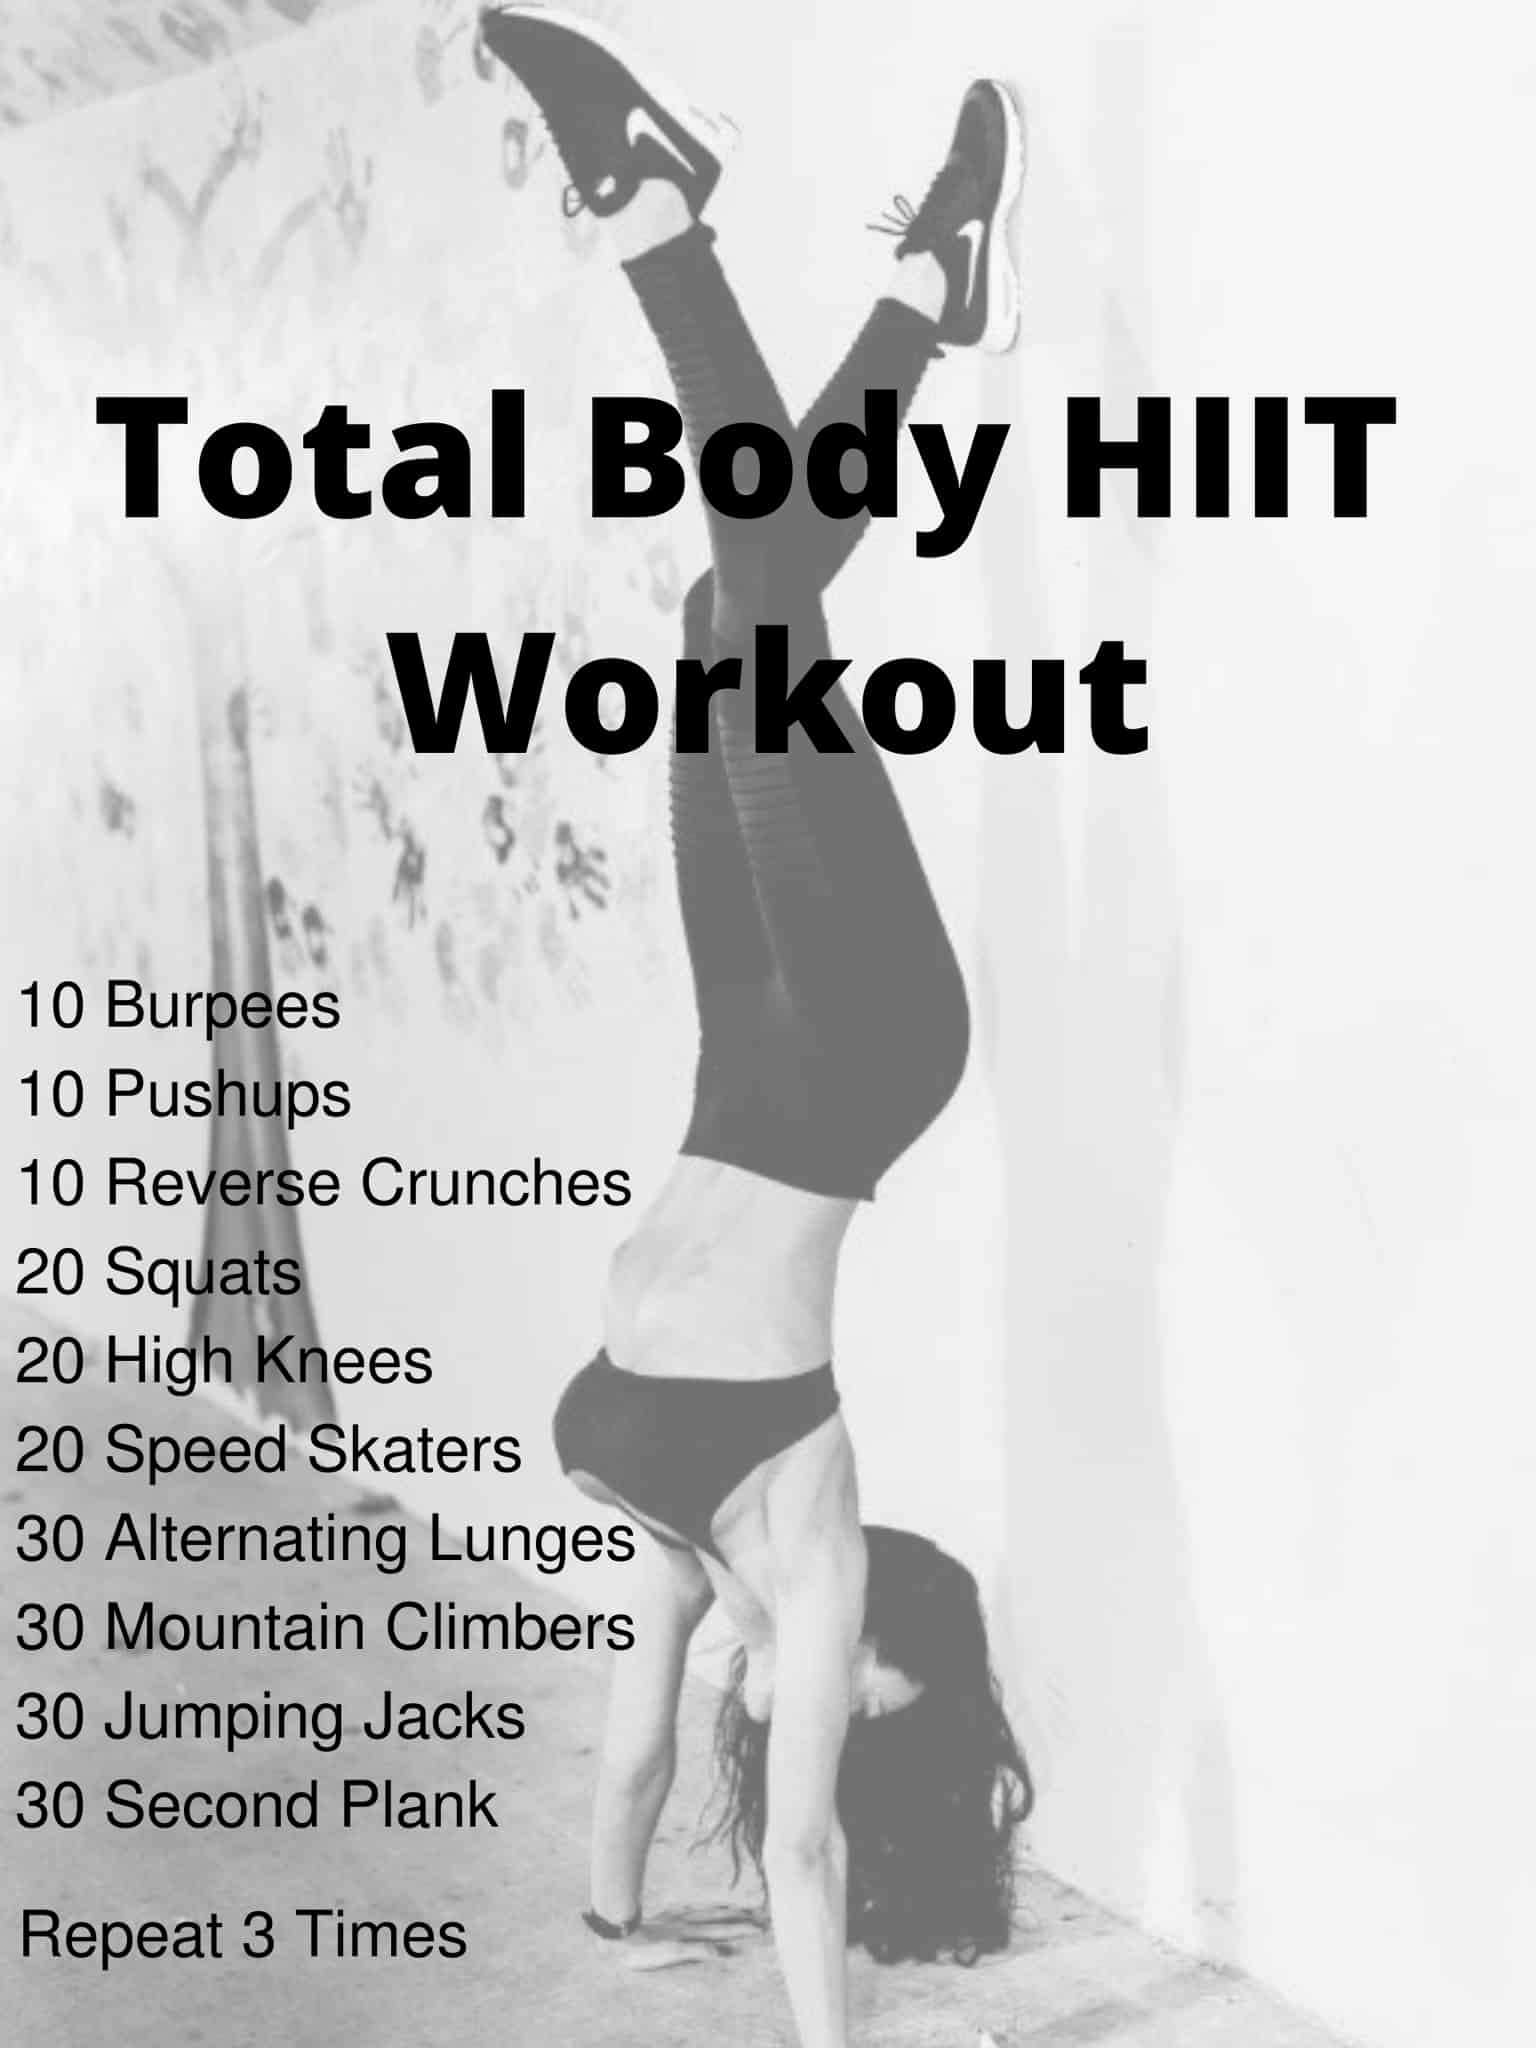 Total Body HIIT Workout - Nourish Your Life